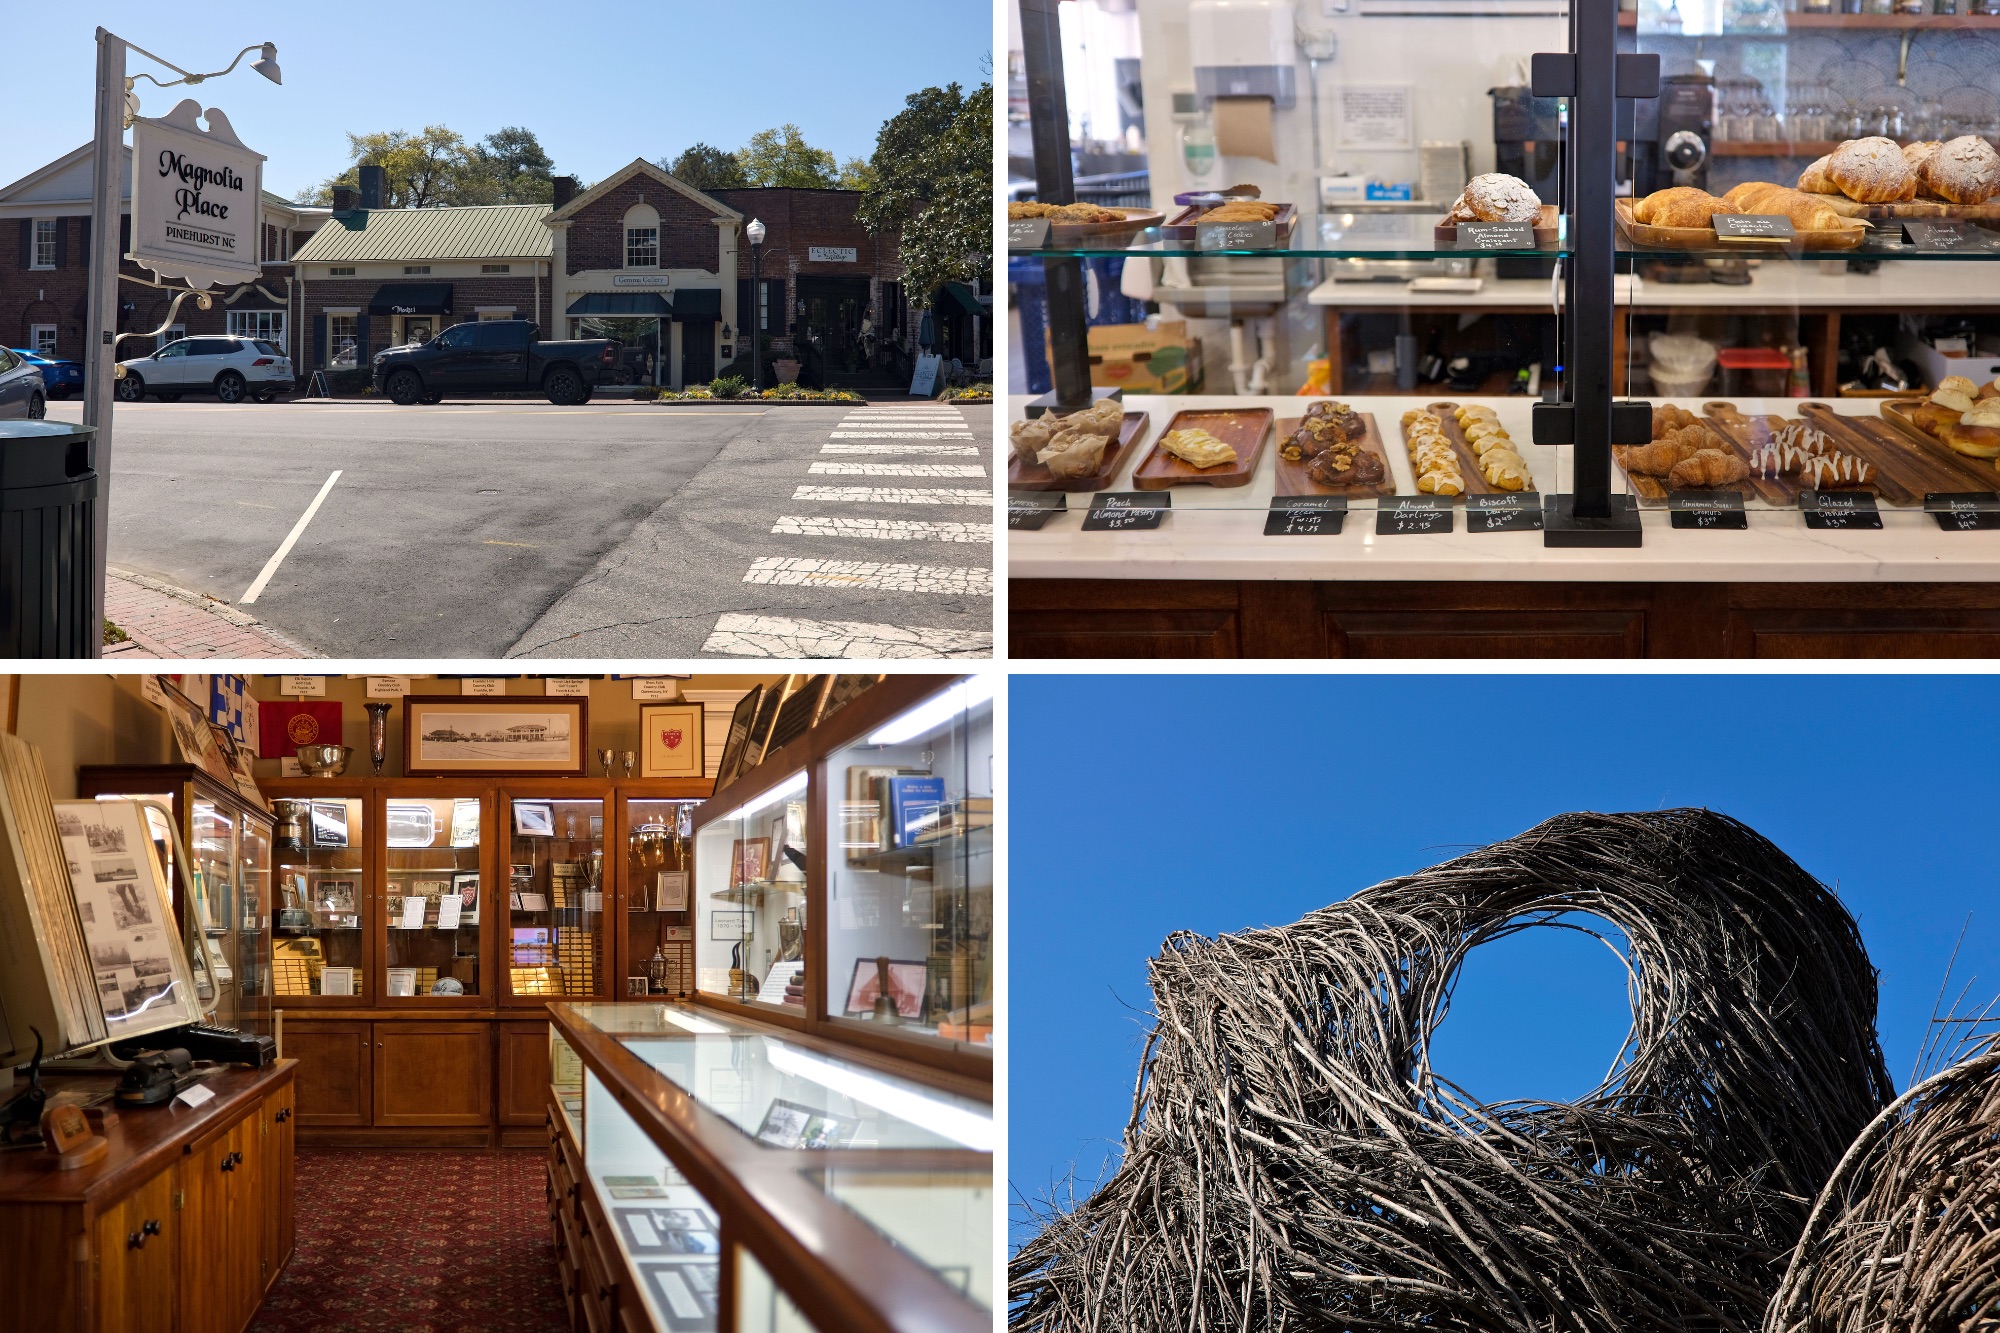 A collage of four images in Pinehurst: the village, a bakery display, a museum, and a nature-inspired sculpture